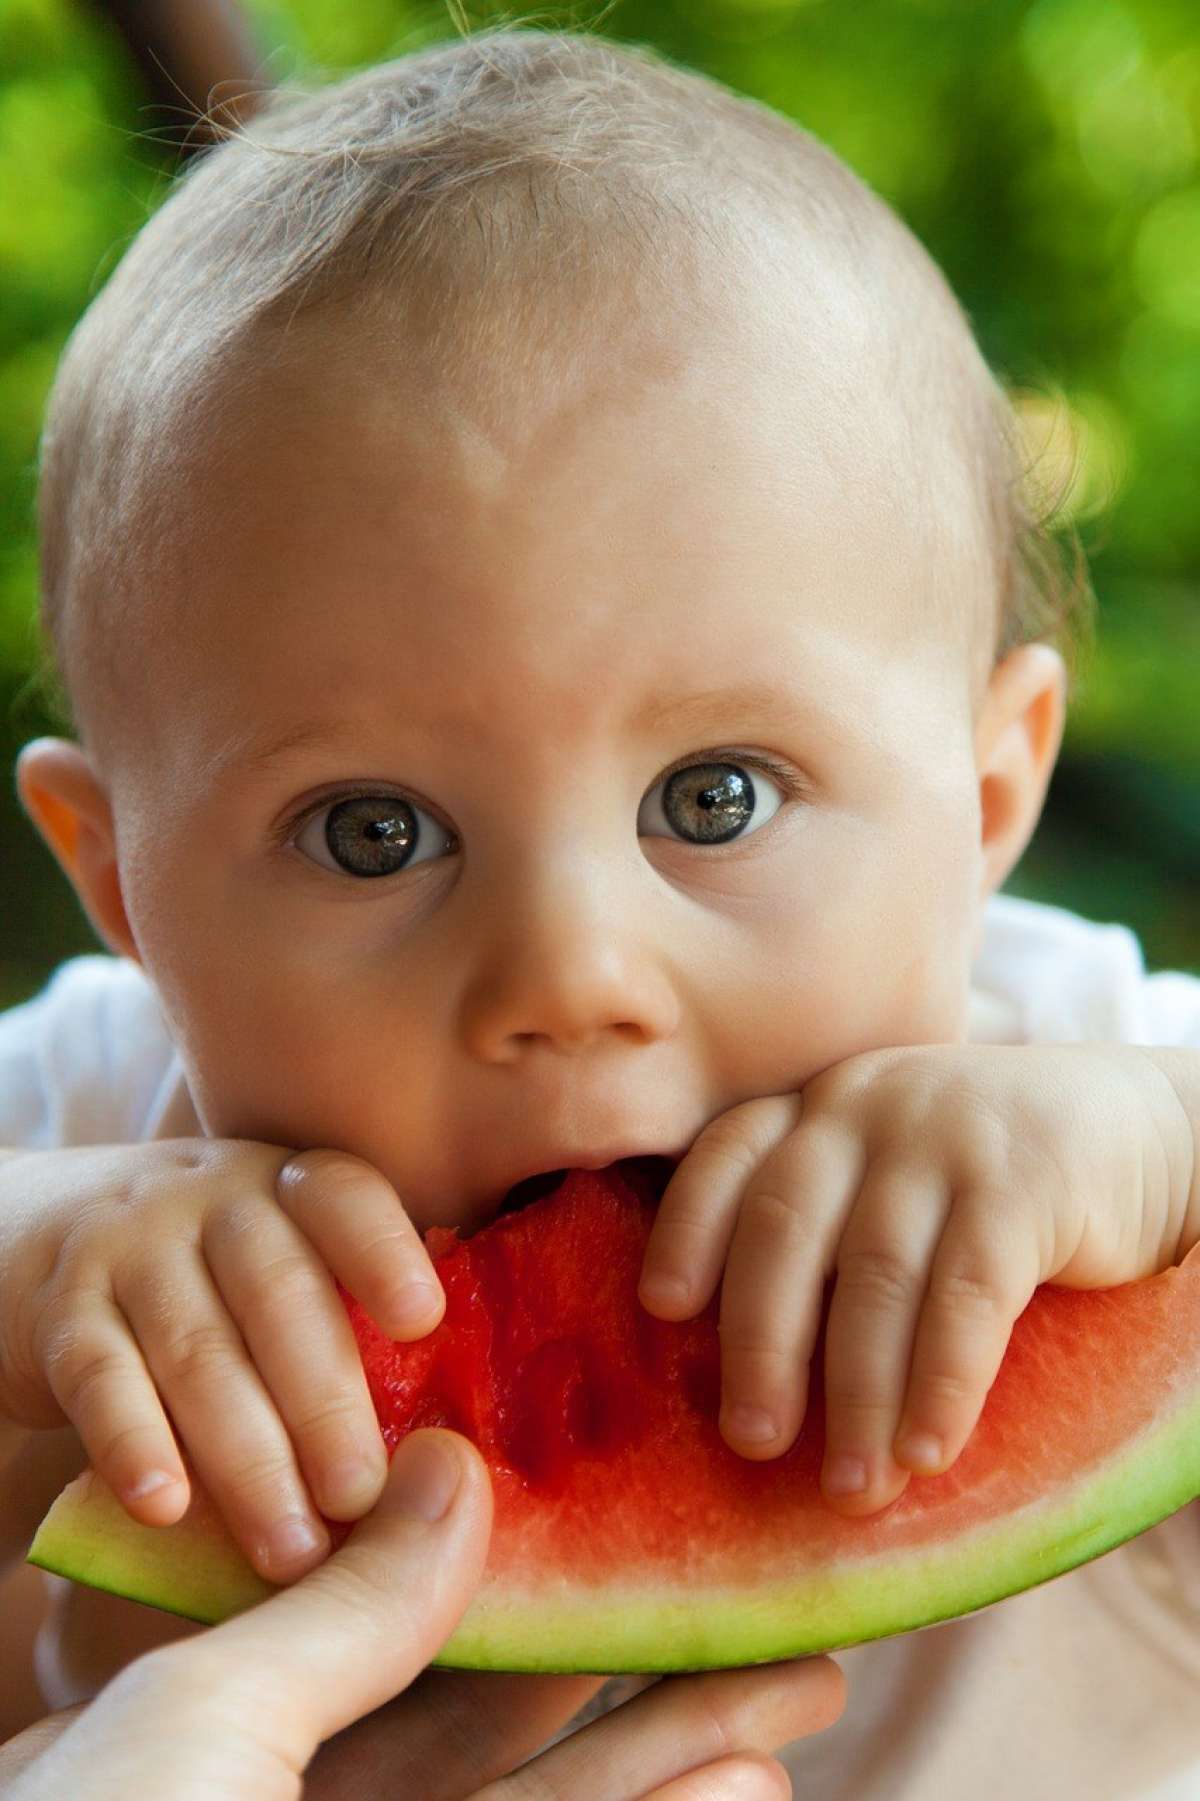 A baby chewing on watermelon